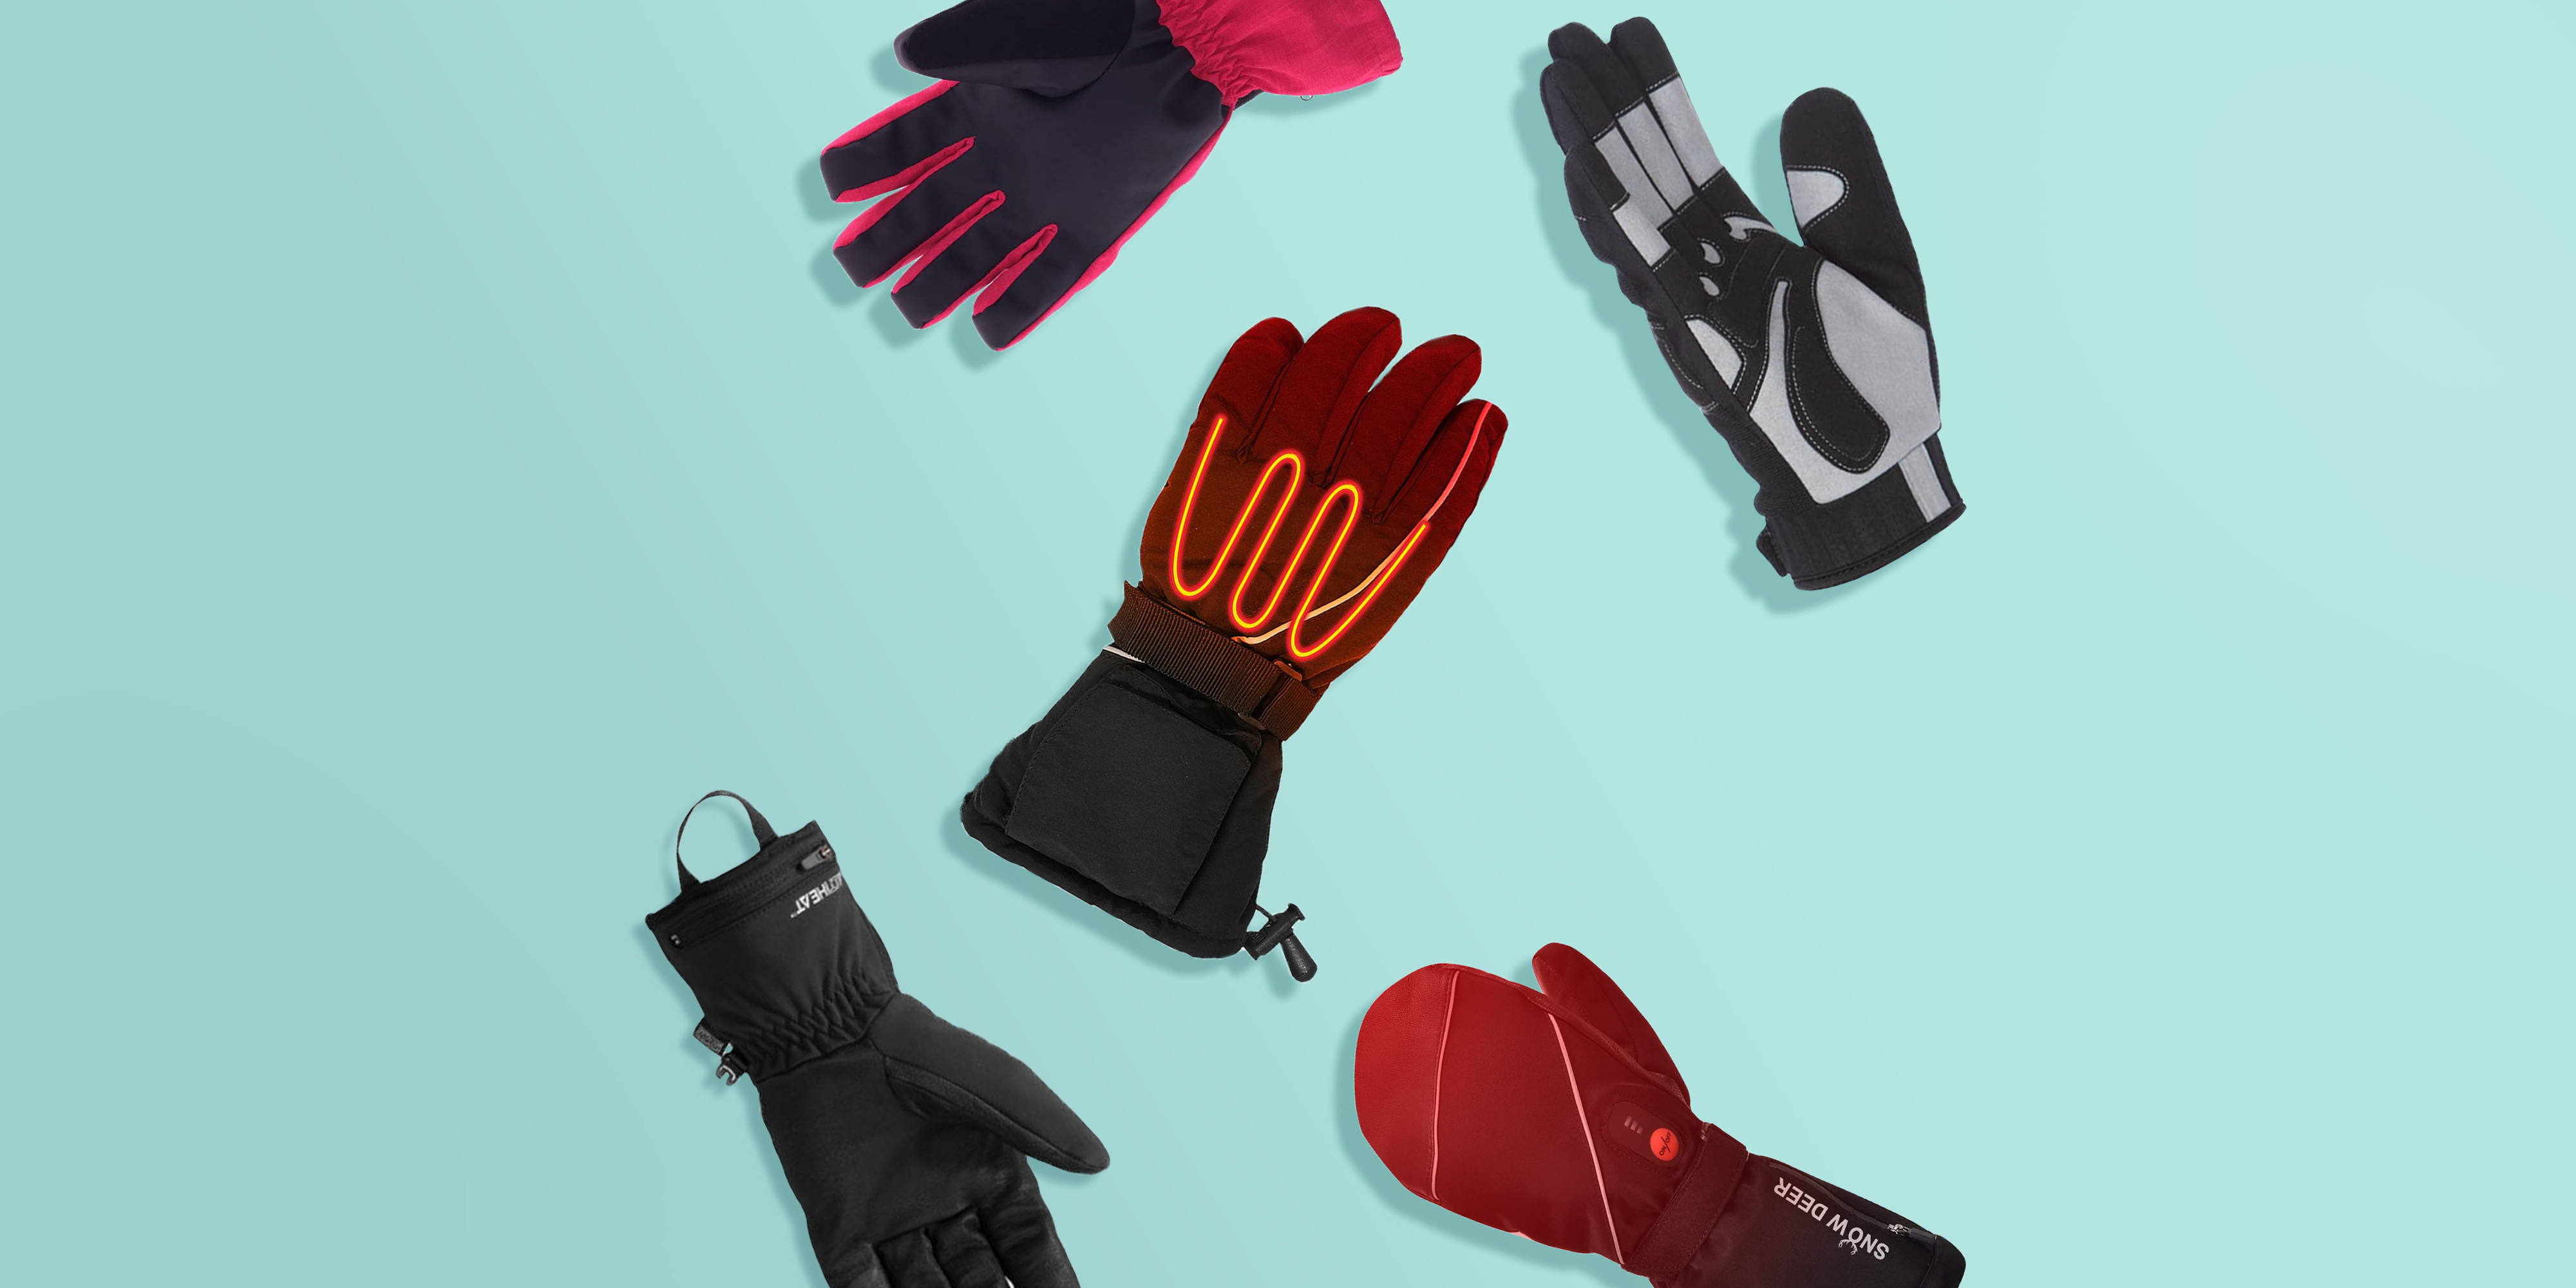 Details about   2020 Electric Heated Gloves Winter Warm Waterproof 3 Levels Battery-operated 